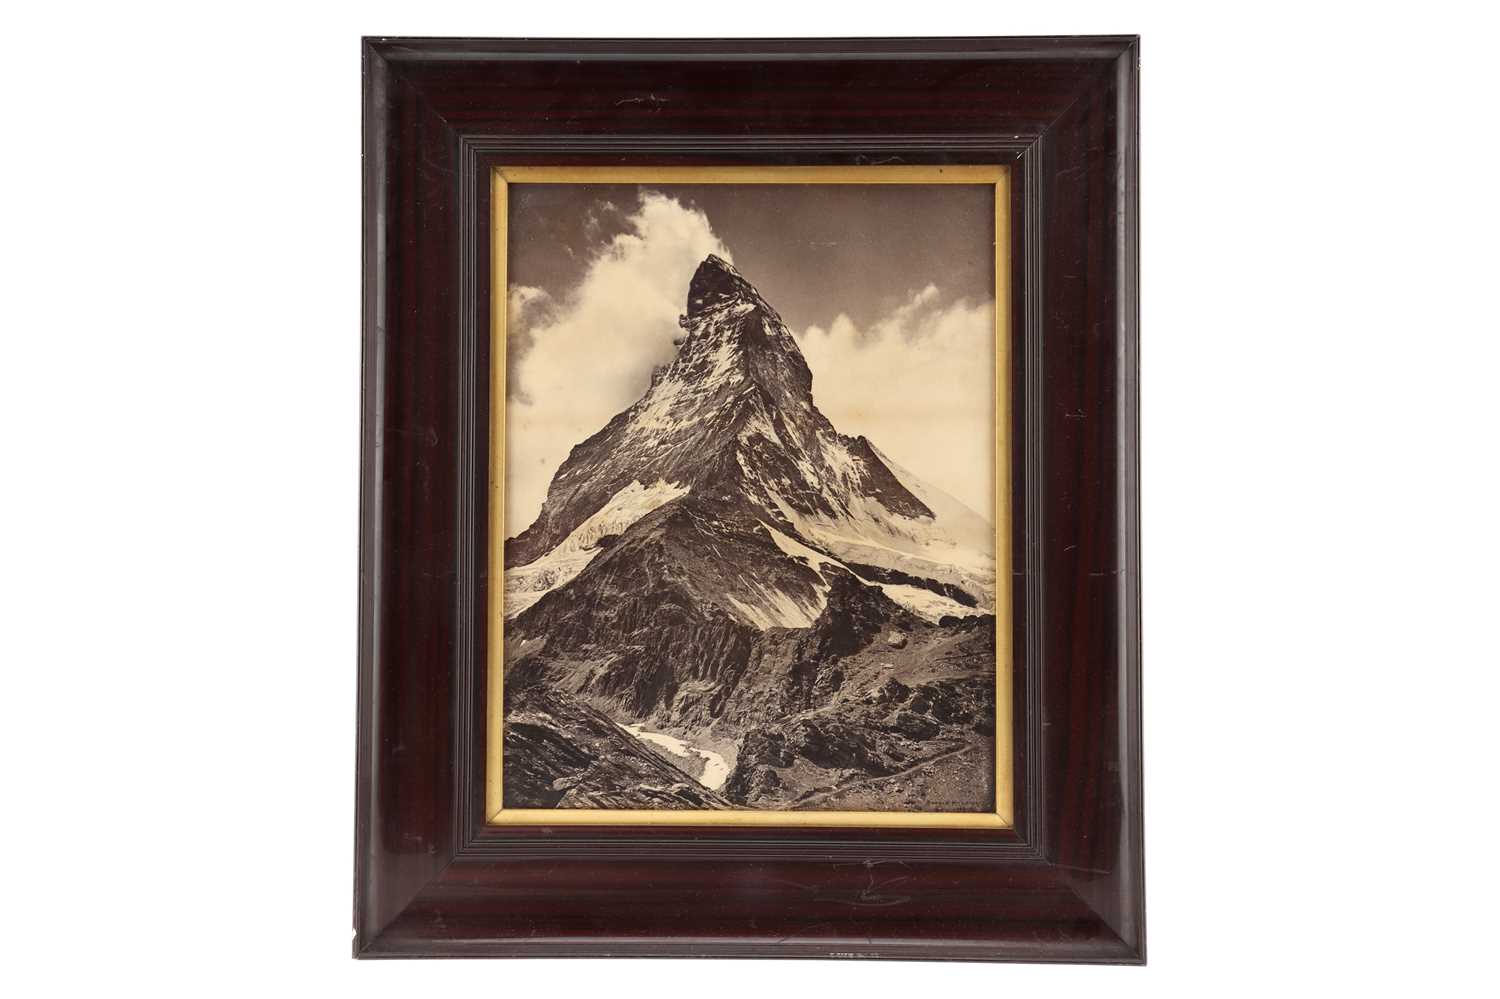 Lot 46 - mountaineering - Early image of the Matterhorn, 1909